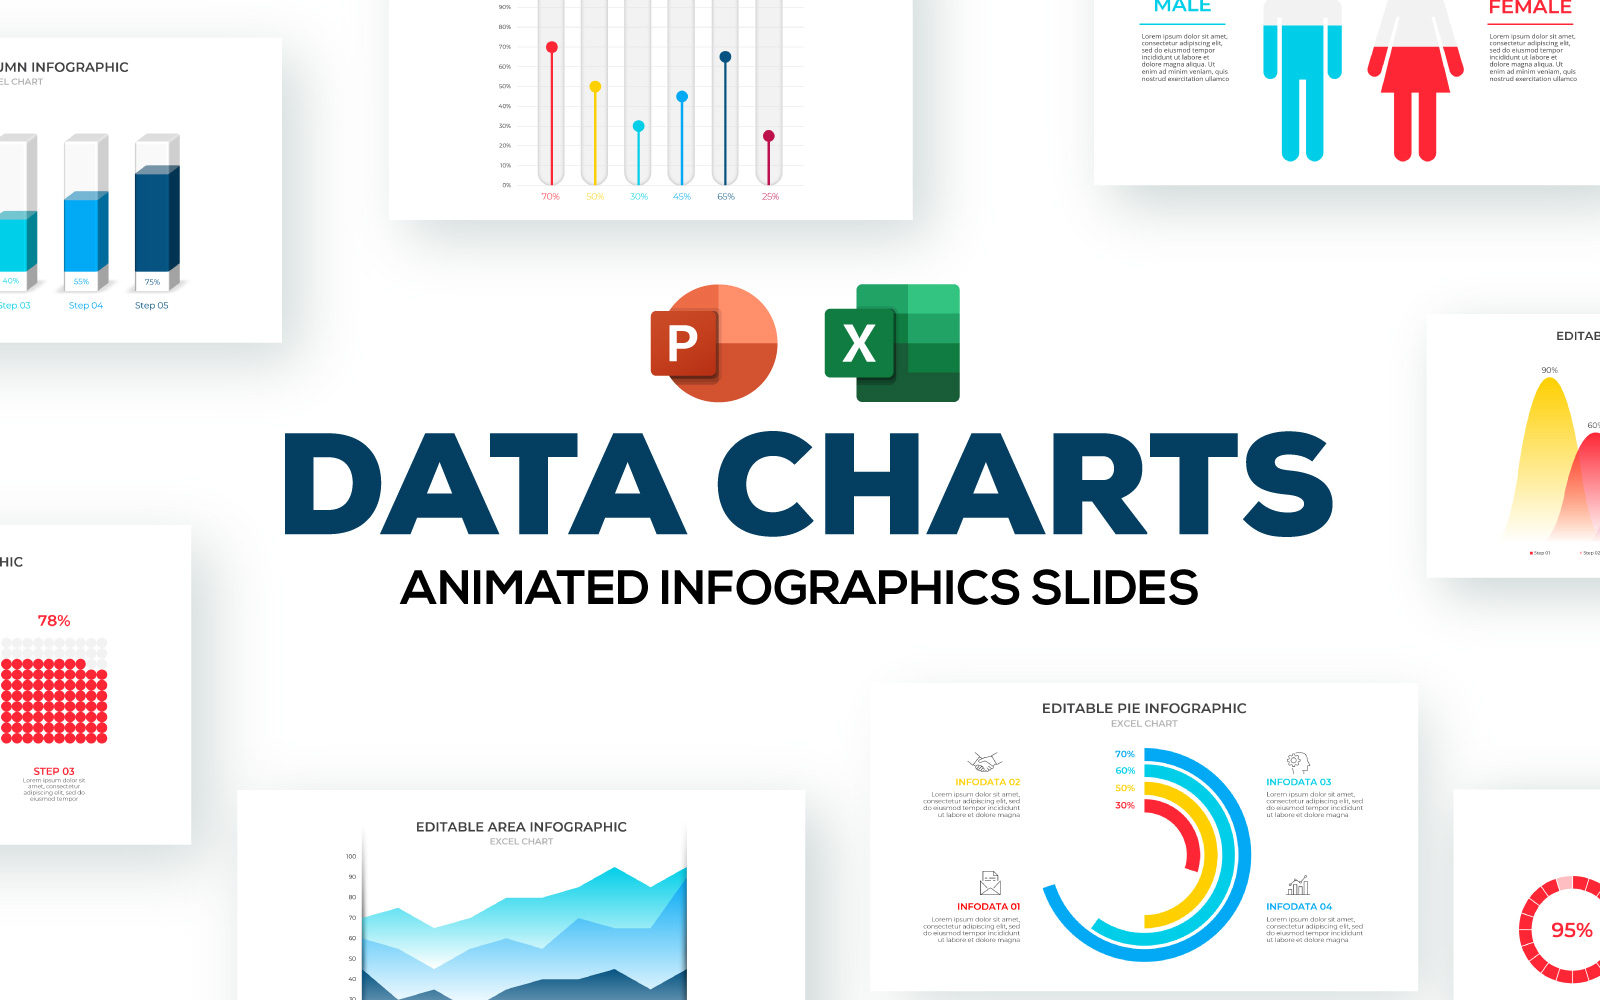 Excel Charts Animated Infographic PowerPoint